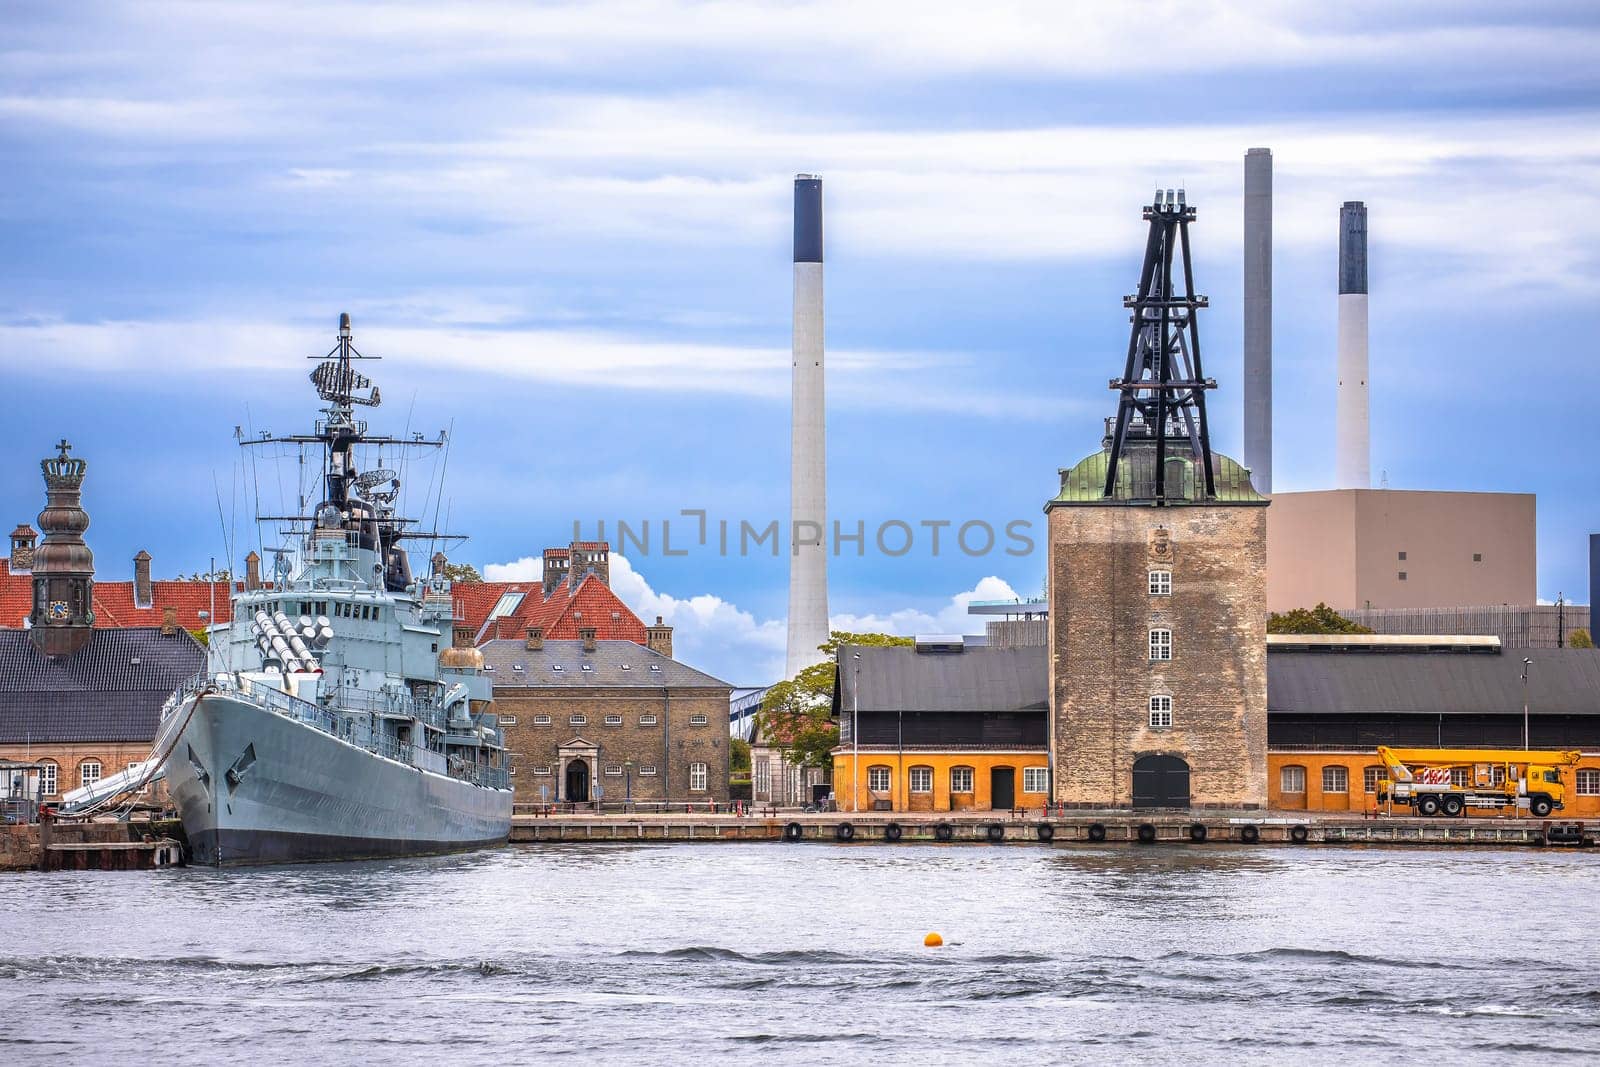 The Ships on Holmen and Copenhagen waterfront view by xbrchx